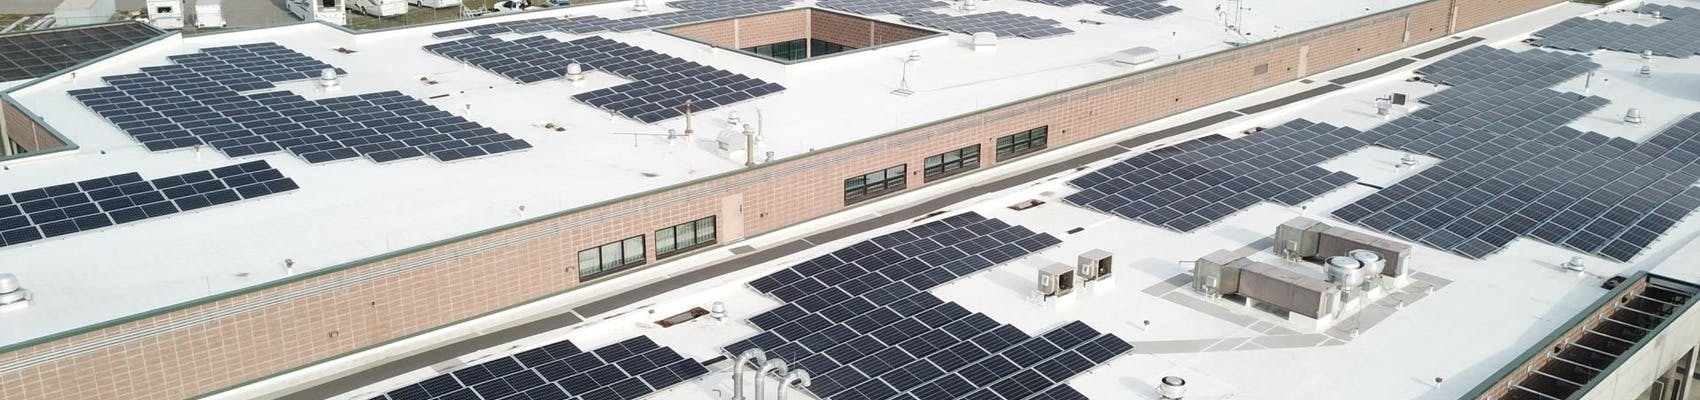 Aerial view of the Missoula County detention center's rooftop solar array